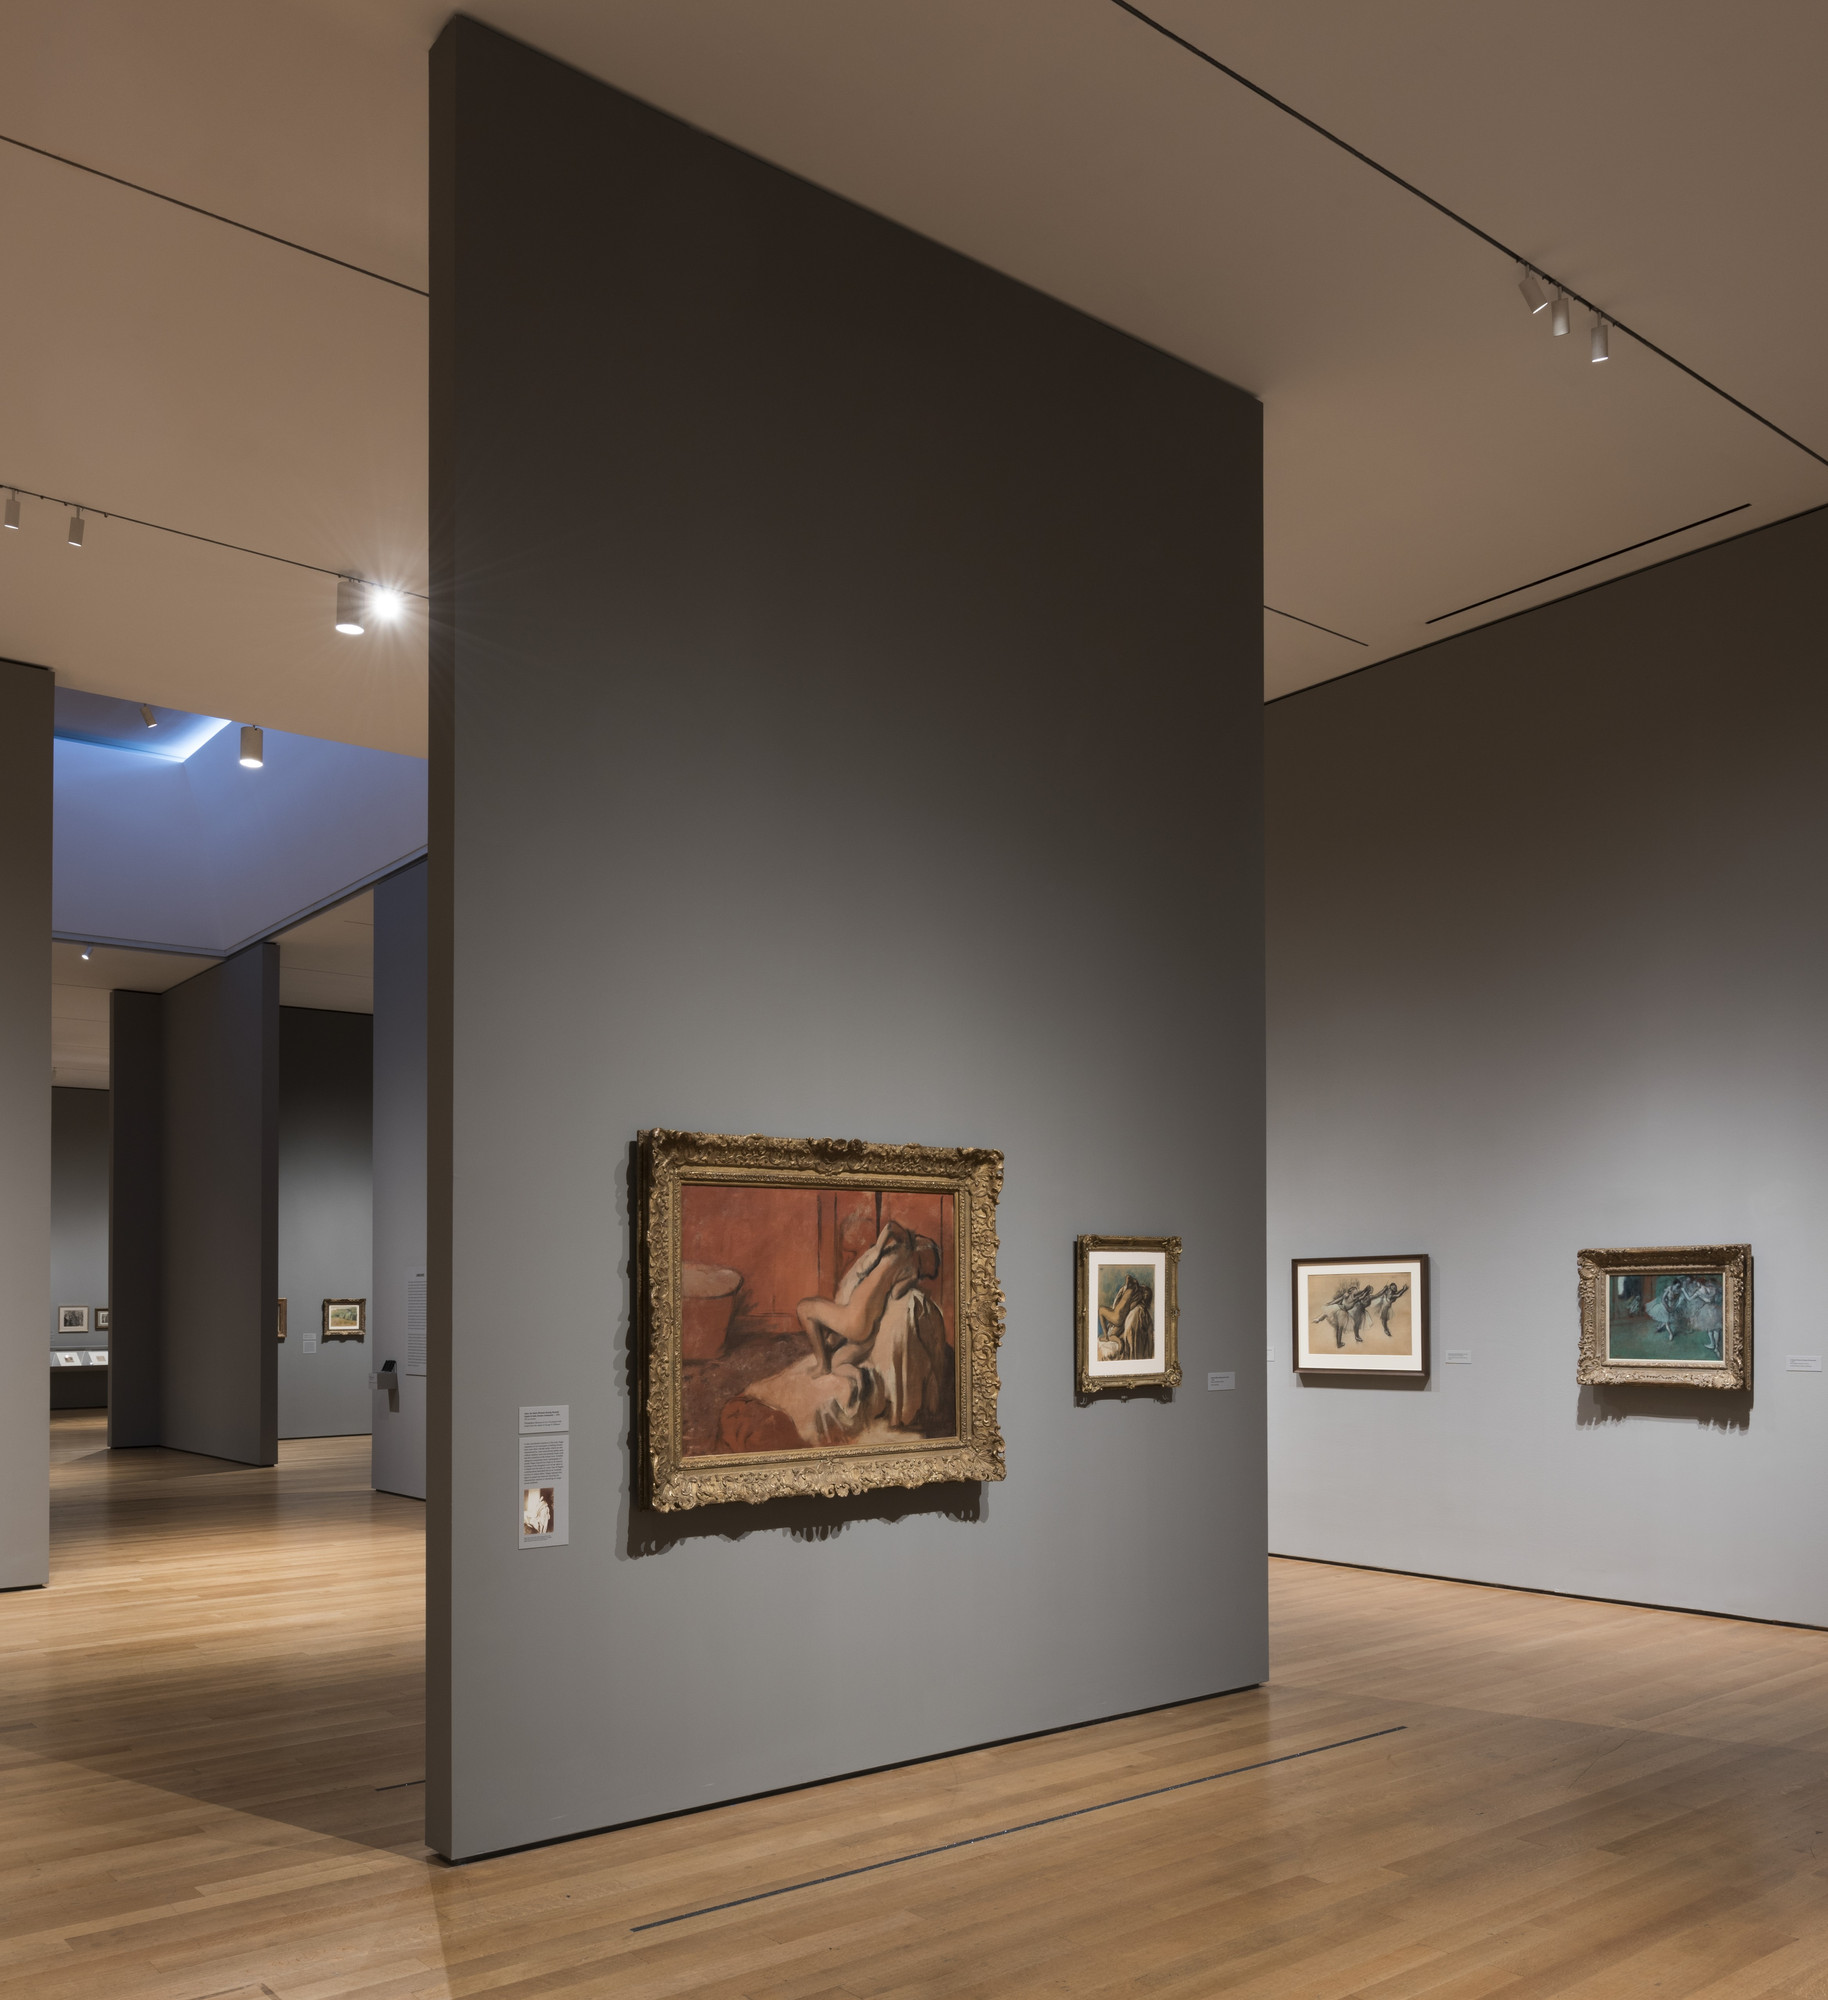 Installation view of the exhibition "Edgar Degas A Strange New Beauty